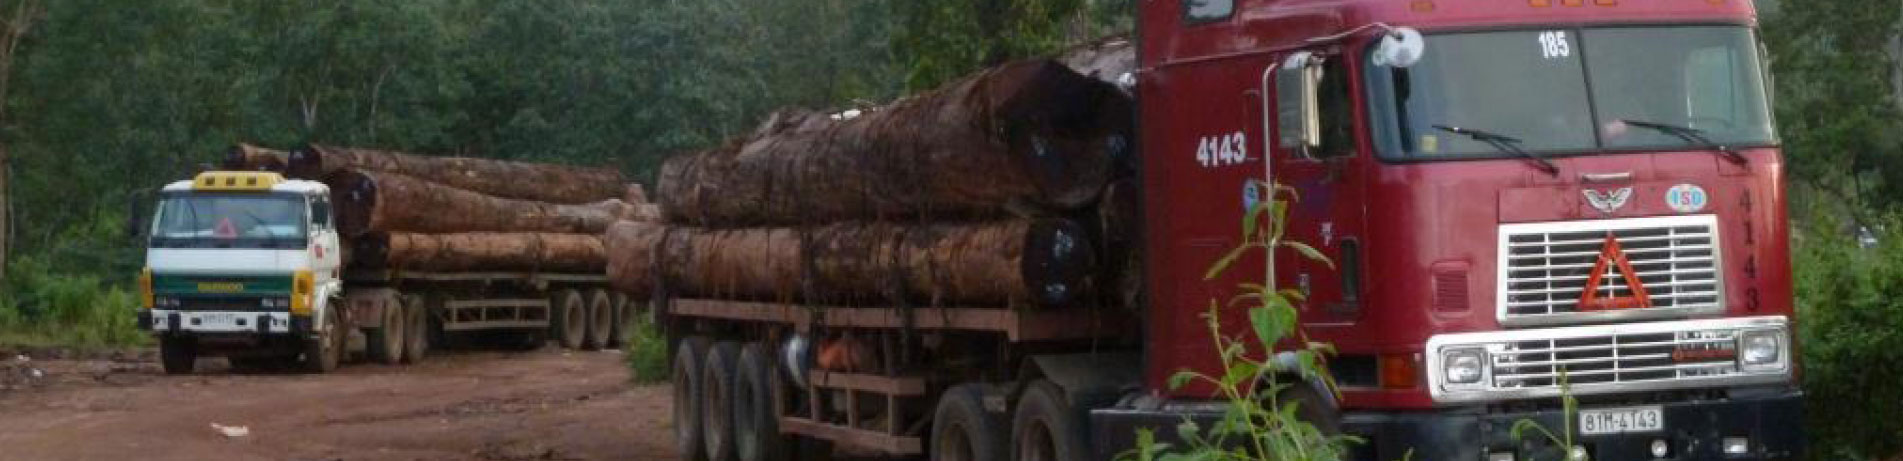 Trucks carrying a load of illegal timber in Laos